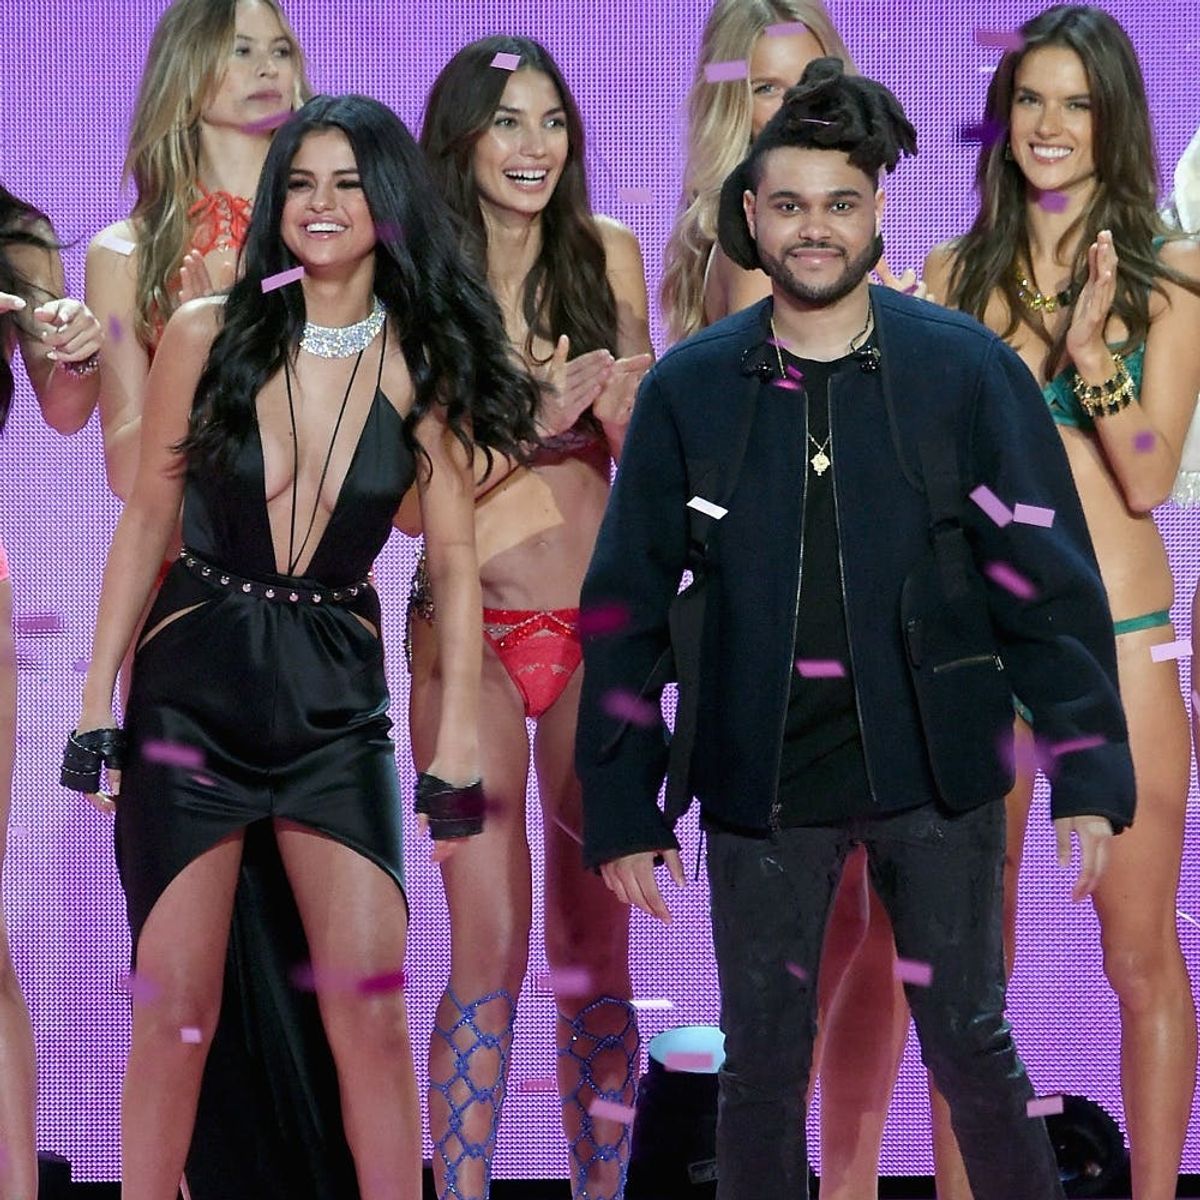 Selena Gomez and The Weeknd Partied Together After the Grammys and Justin Bieber Isn’t Happy